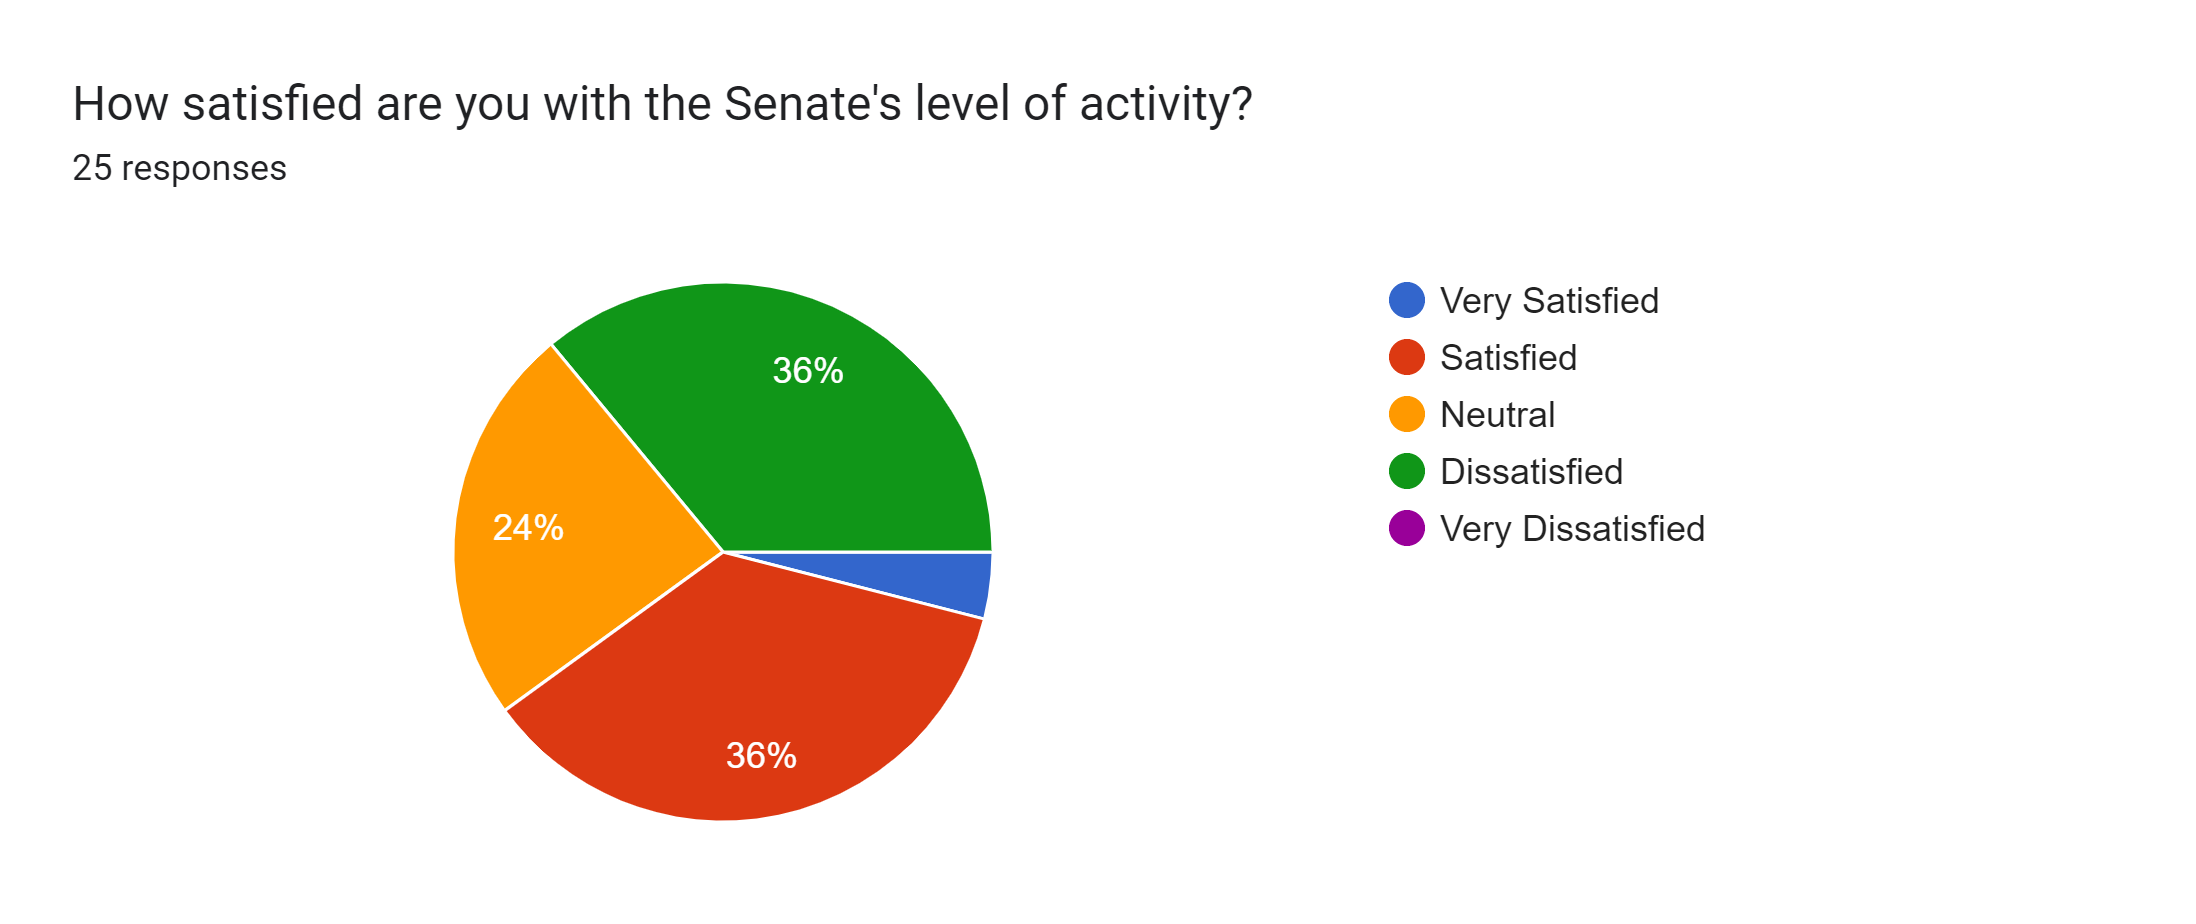 Forms response chart. Question title: How satisfied are you with the Senate's level of activity?. Number of responses: 25 responses.